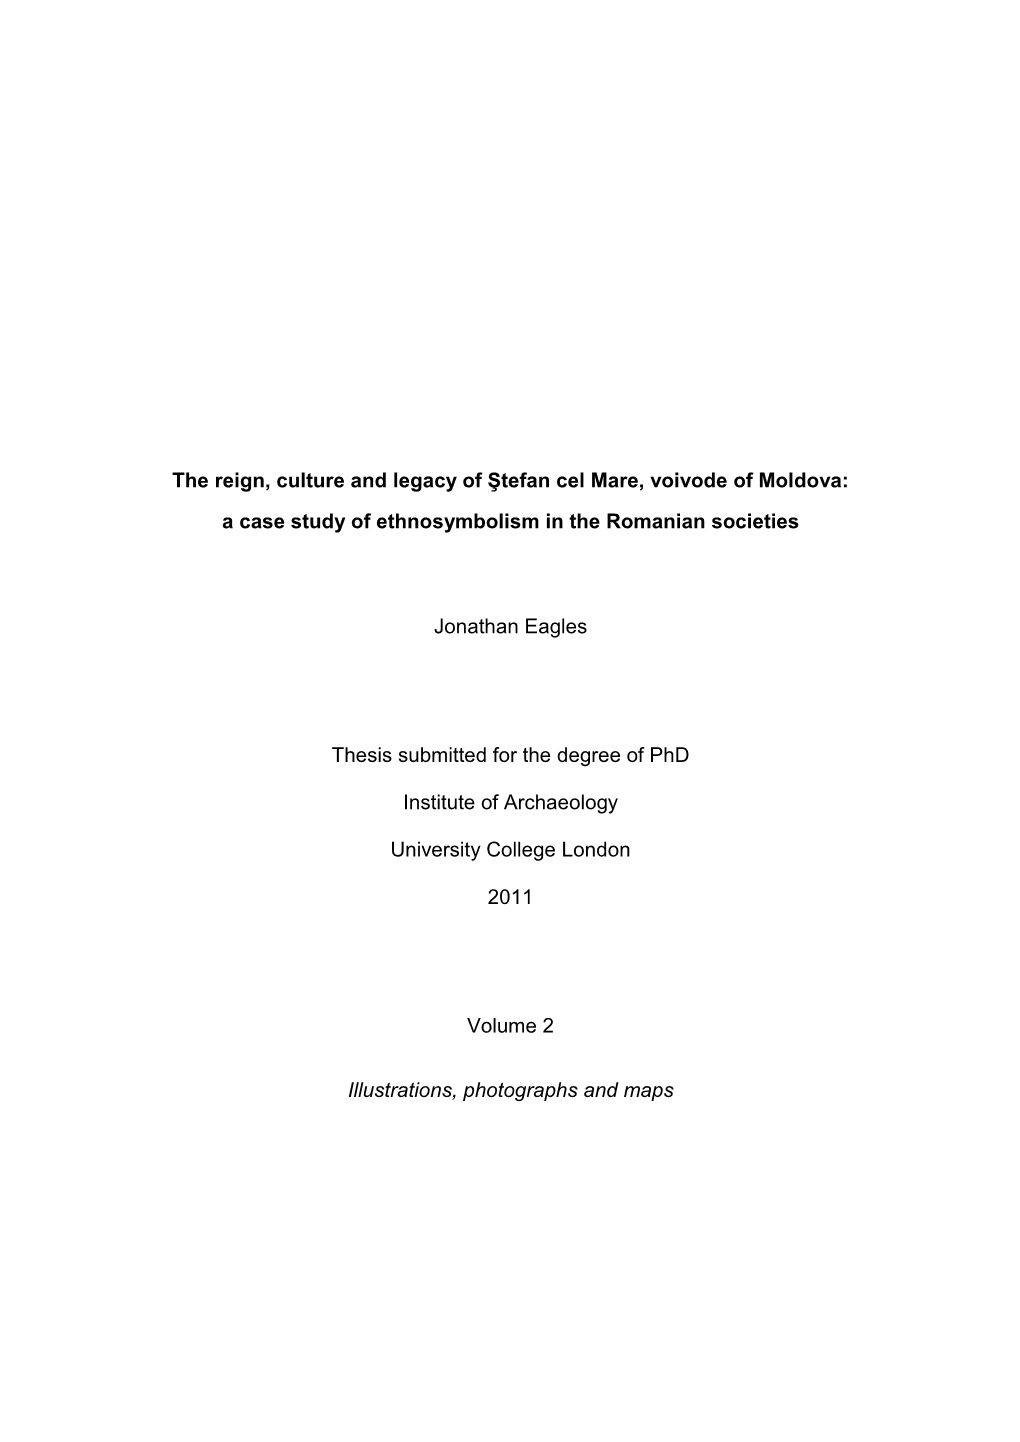 The Reign, Culture and Legacy of Ştefan Cel Mare, Voivode of Moldova: a Case Study of Ethnosymbolism in the Romanian Societies